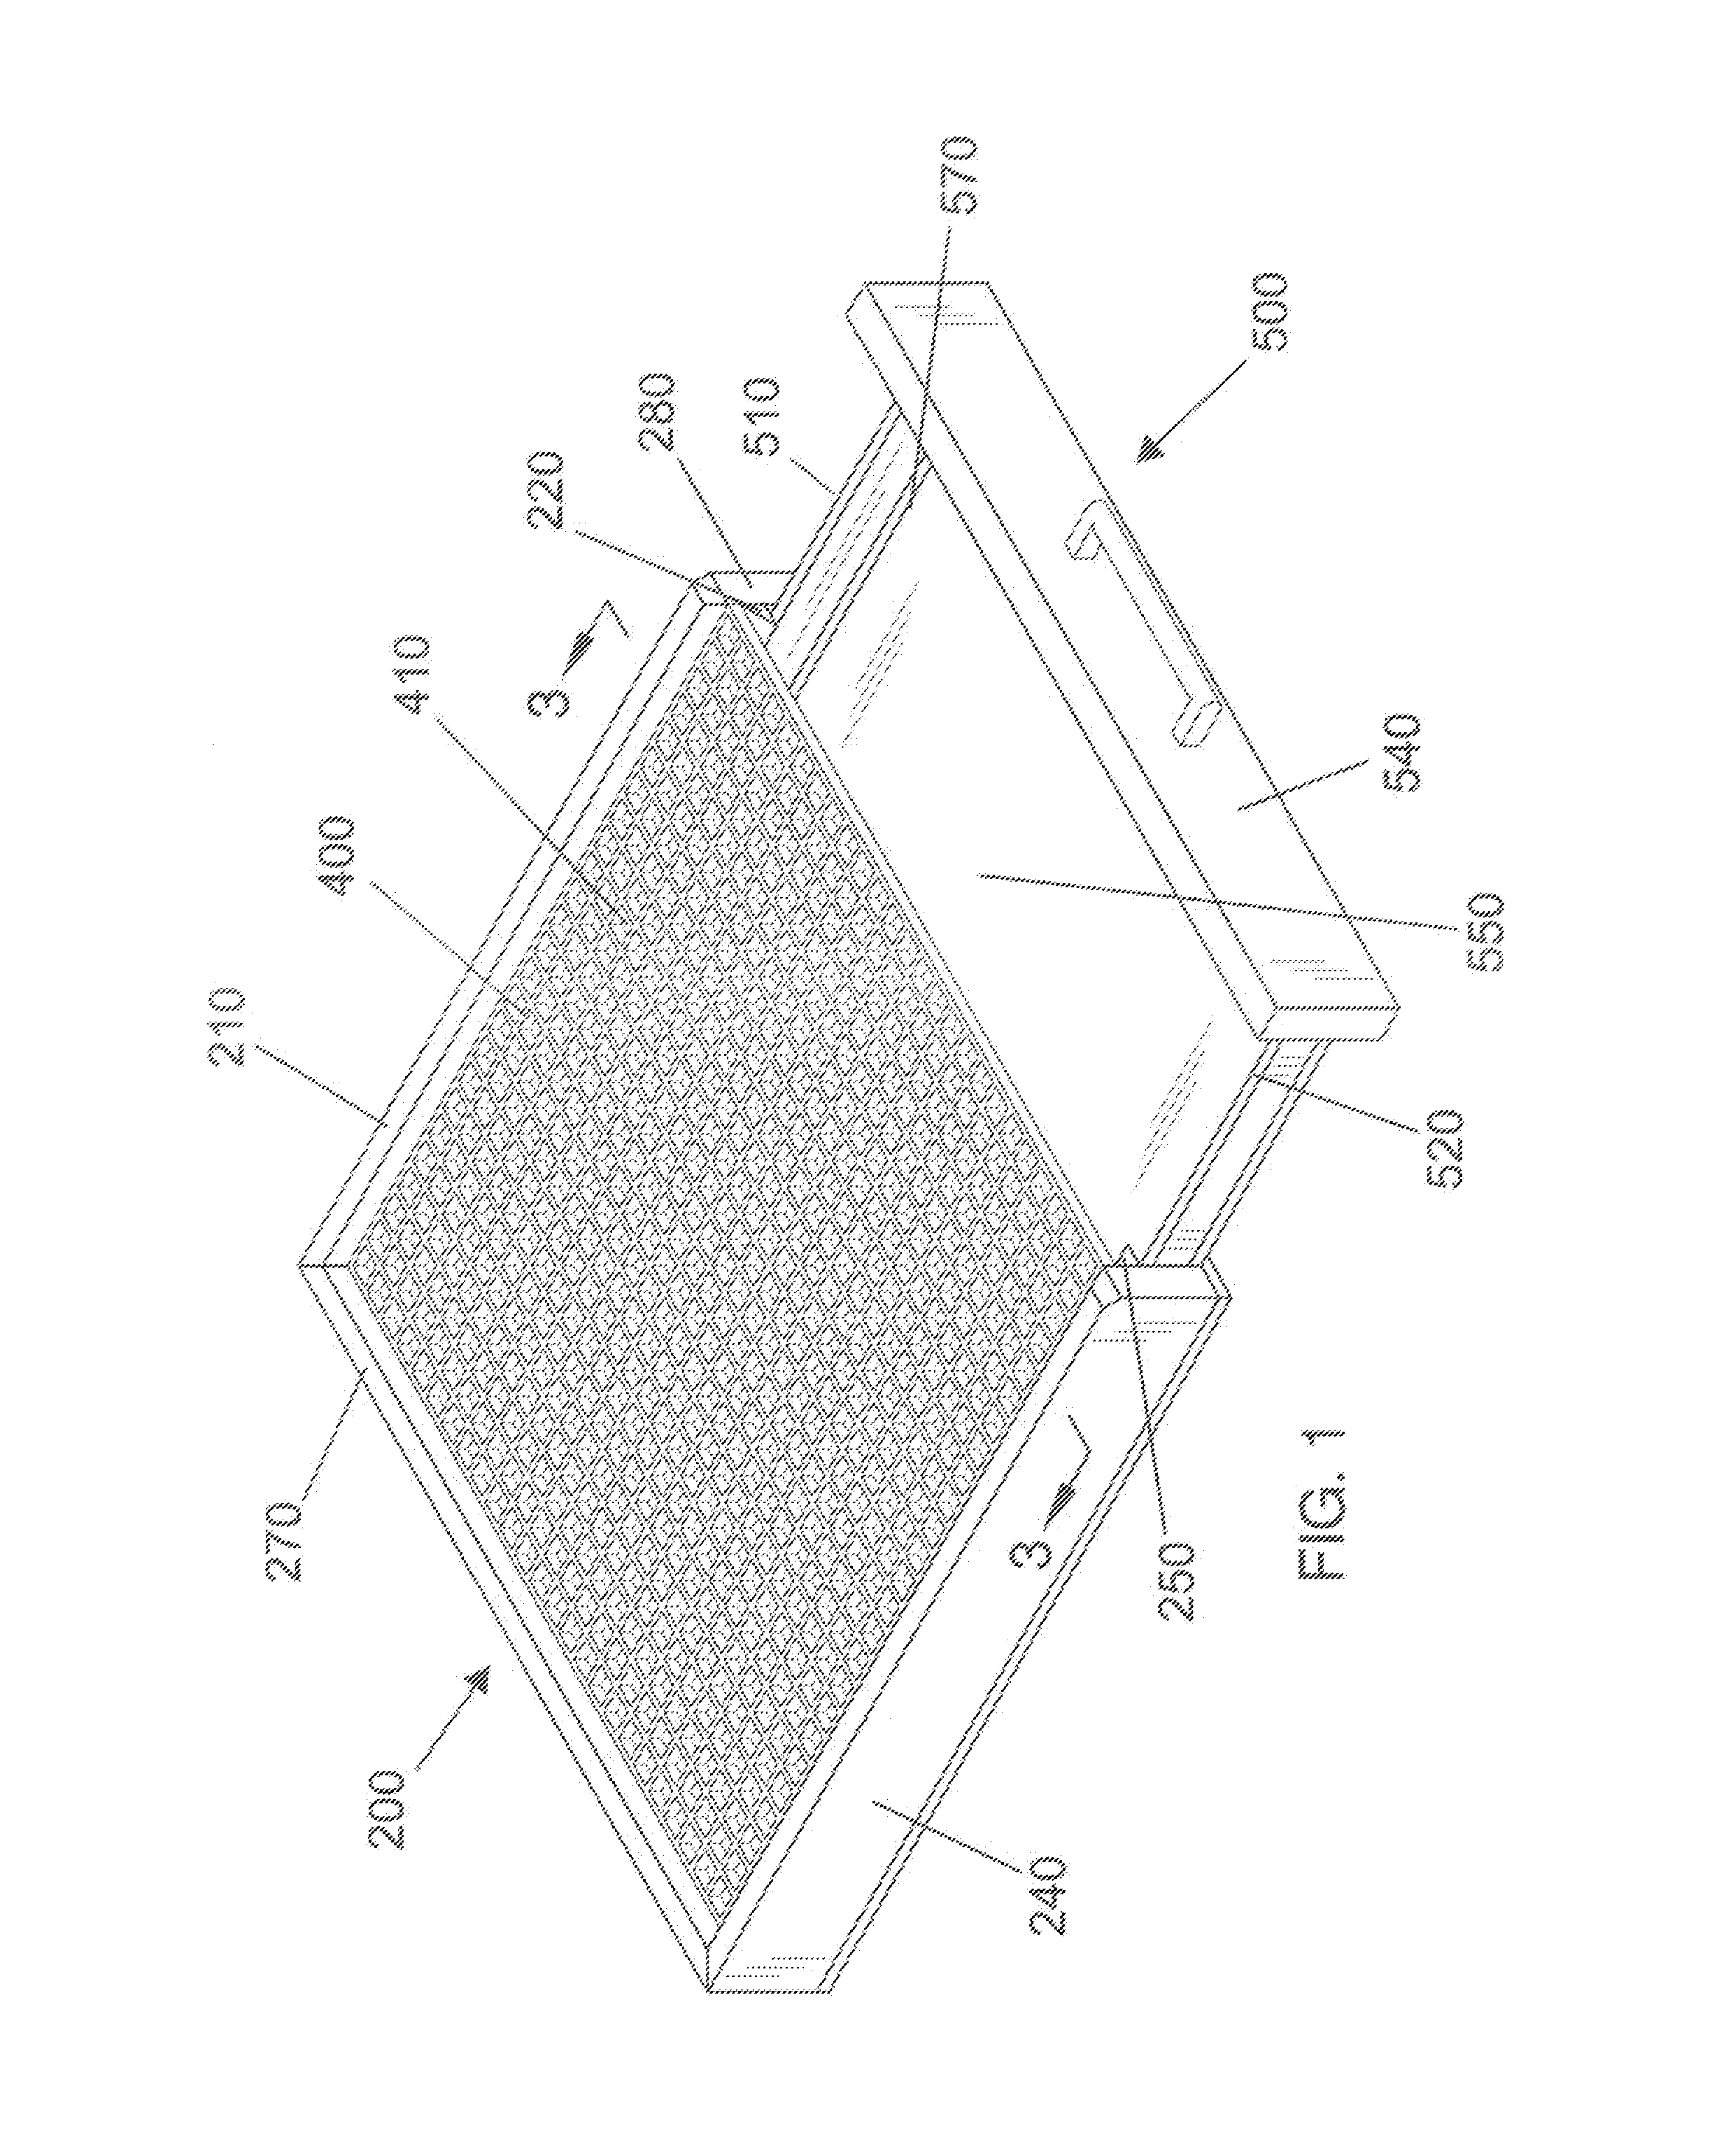 Chip collection system for a key cutting machine